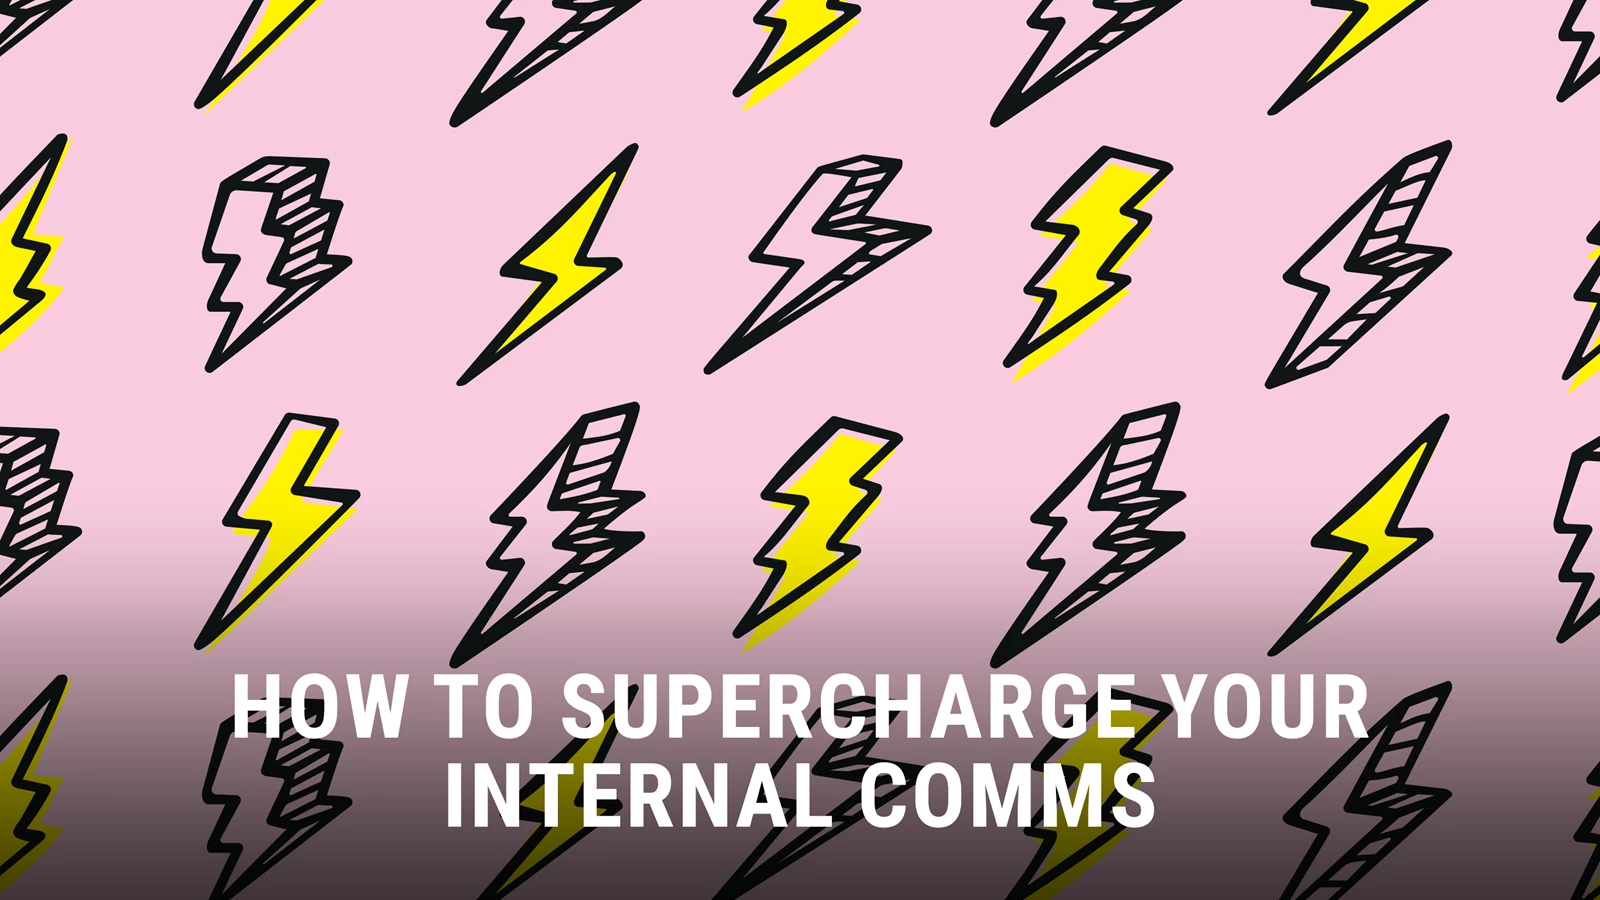 Supercharge your internal communications guide cover